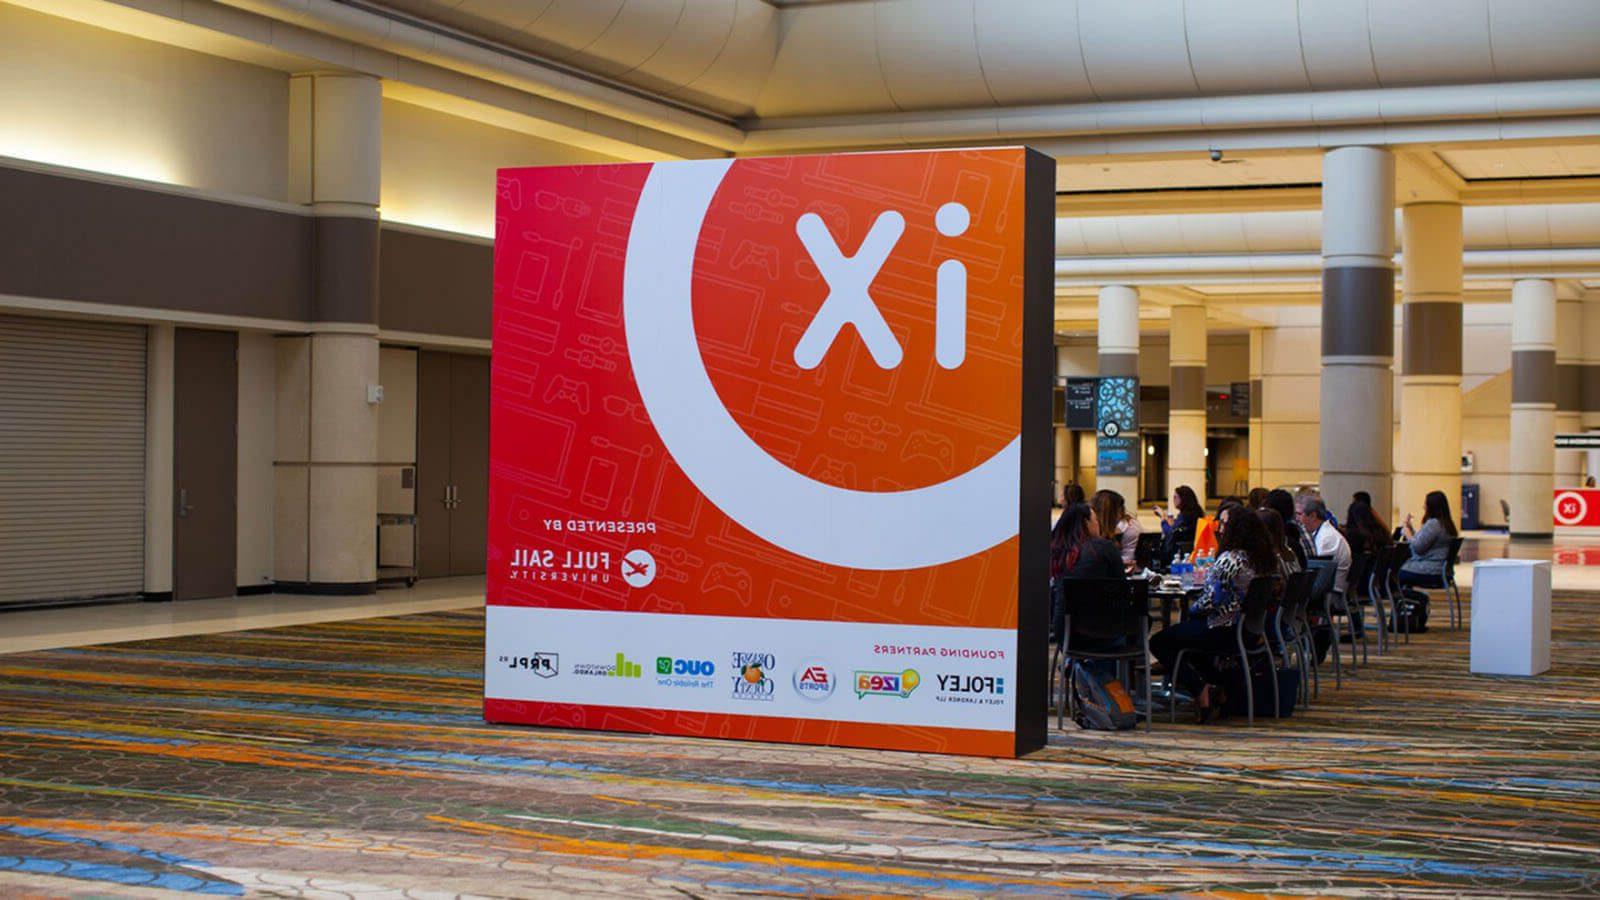 OrlandoiX Brings Technological Leaders and Innovators to Central Florida - Hero image 